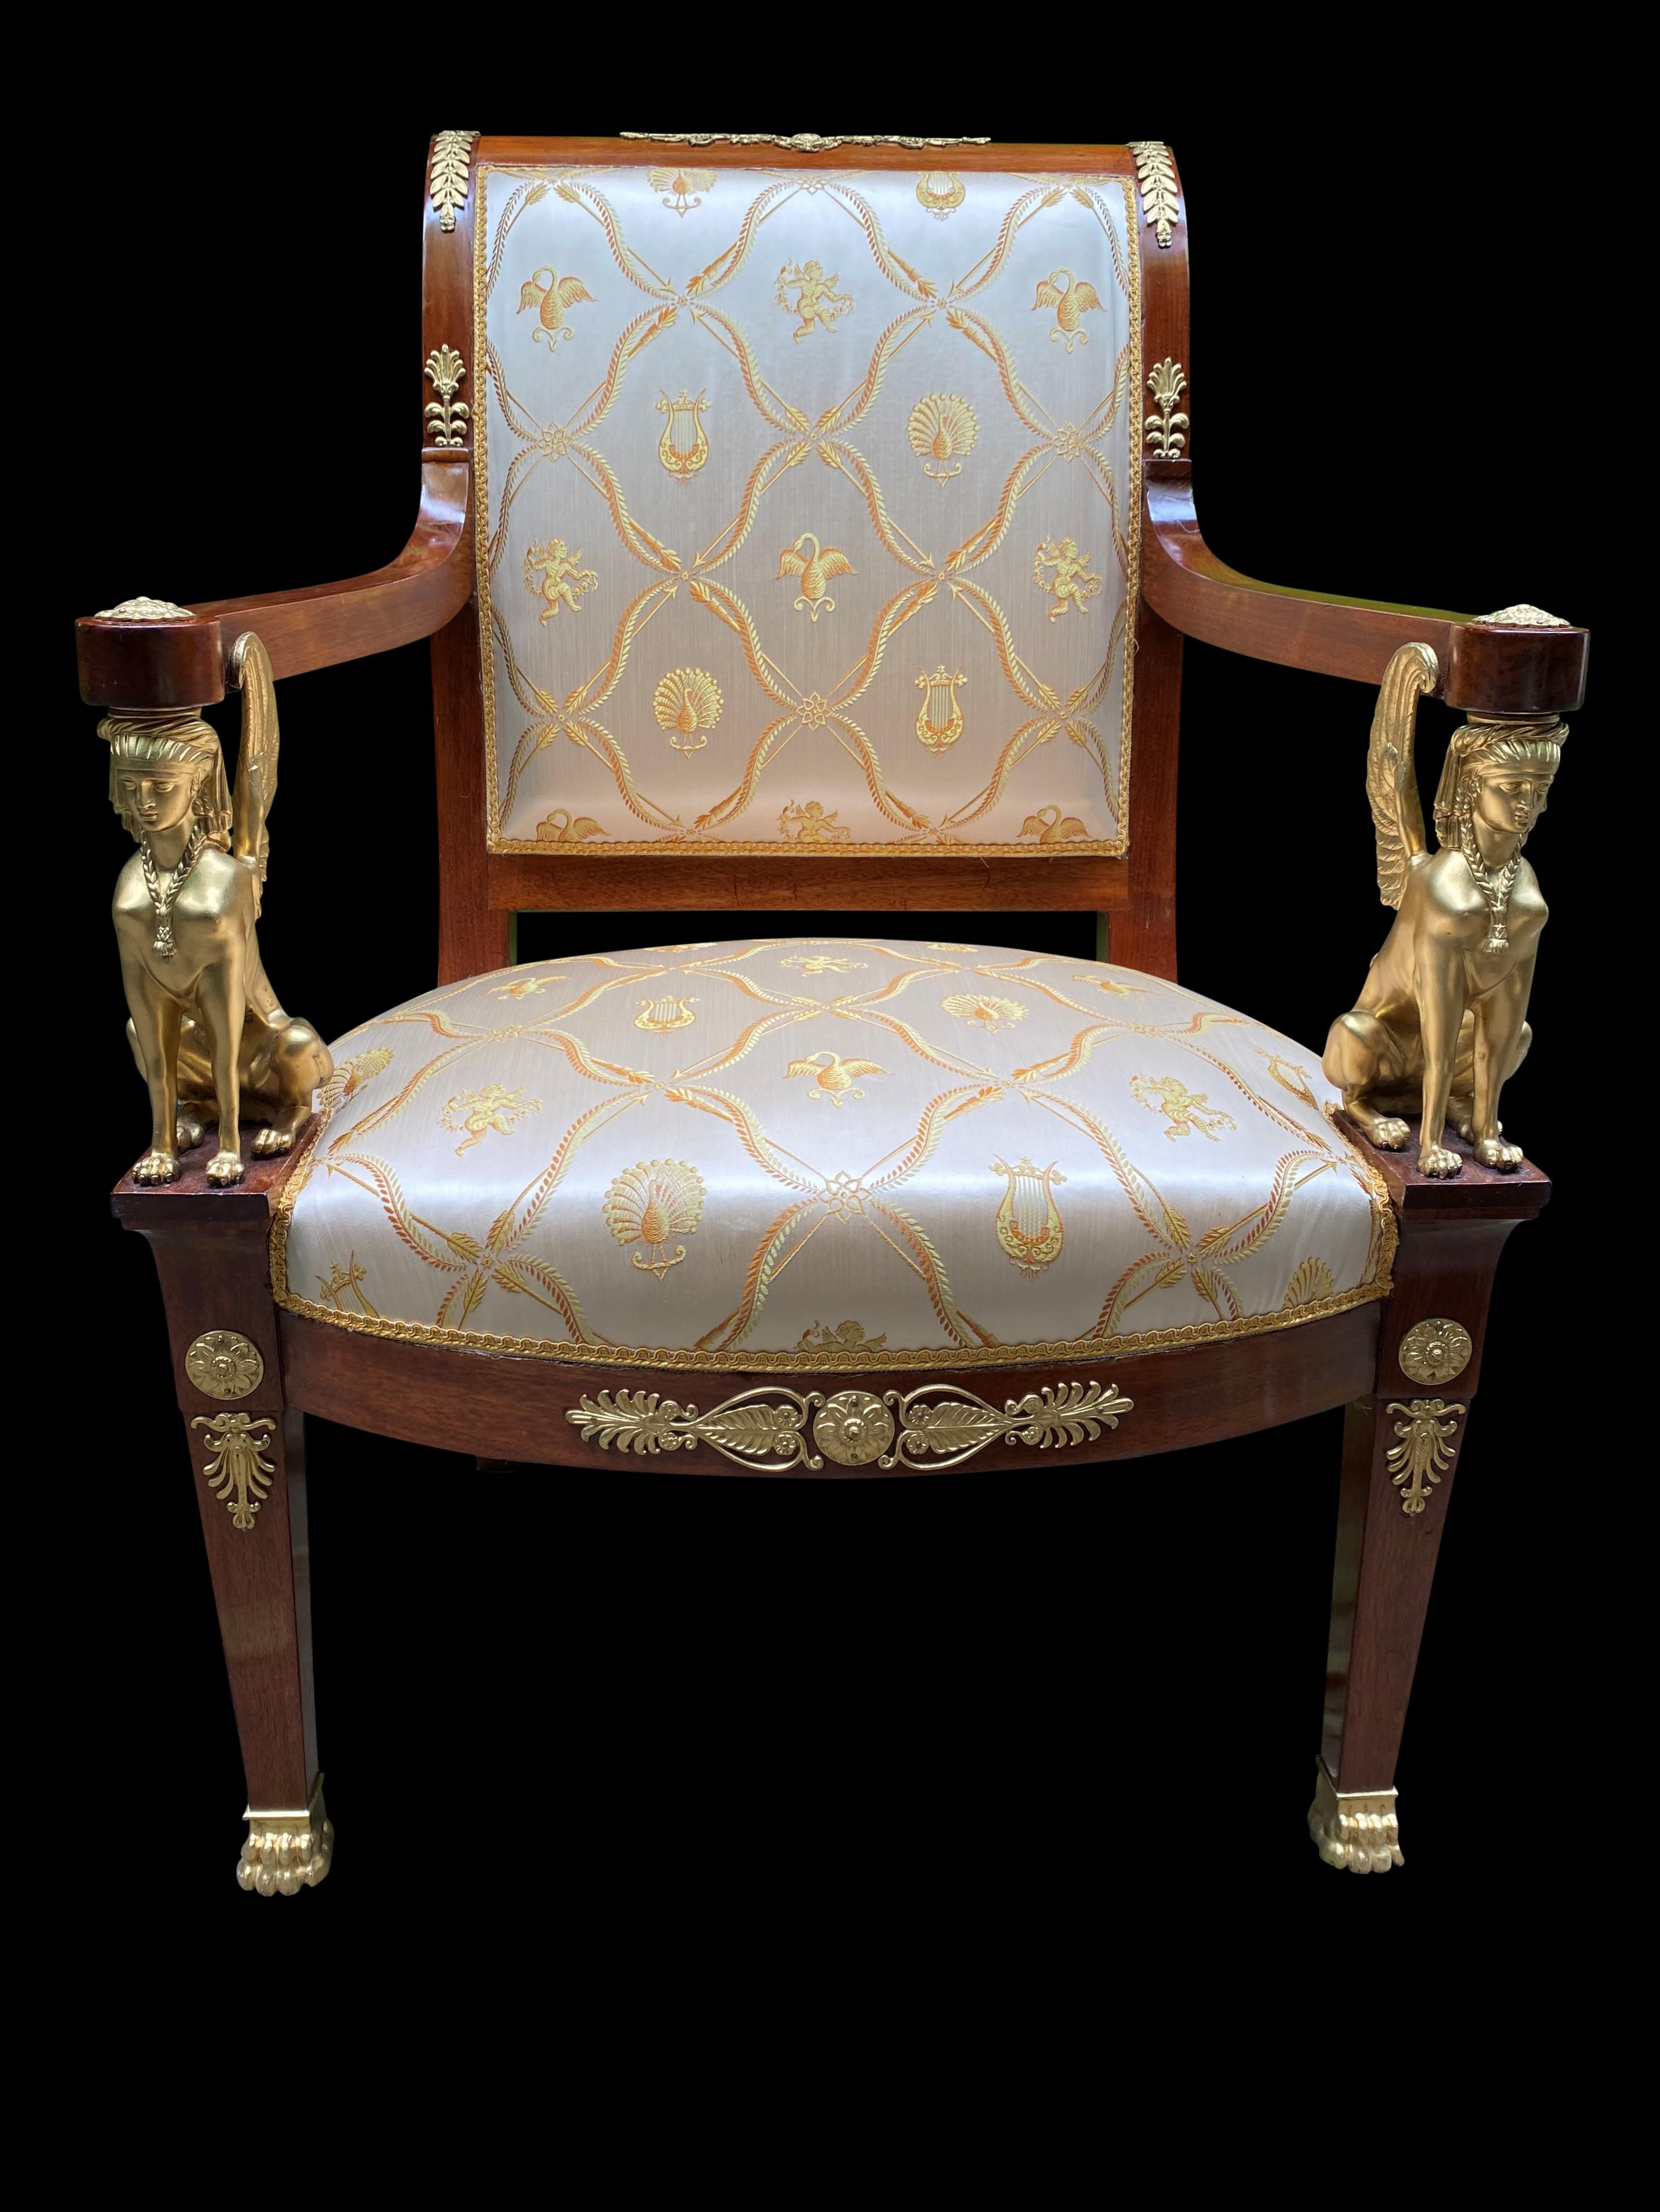 Mahogany French Empire Armchairs with Bronze Mounts, 19th Century For Sale